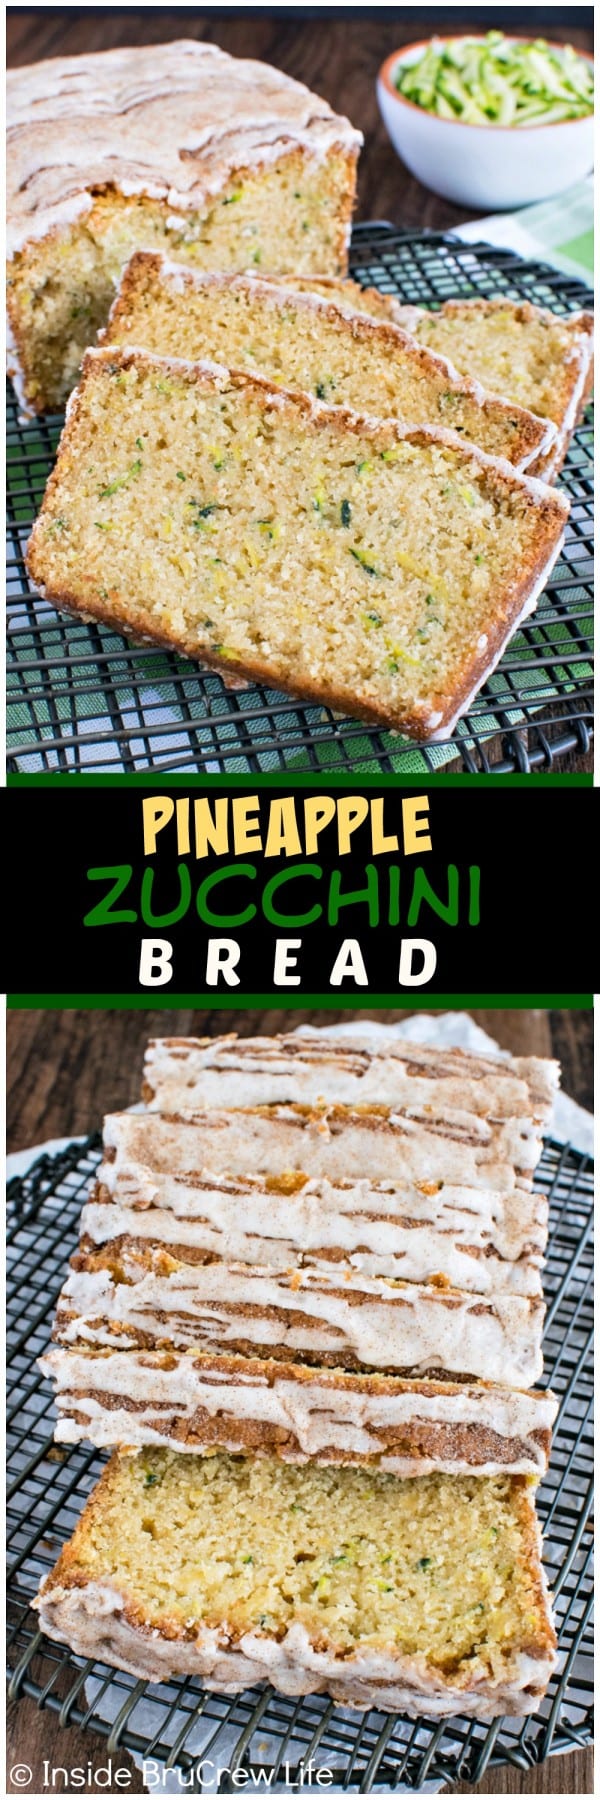 Pineapple Zucchini Bread - shredded pineapple and a pineapple glaze gives this sweet bread recipe a great tropical flavor!! It's a family favorite!